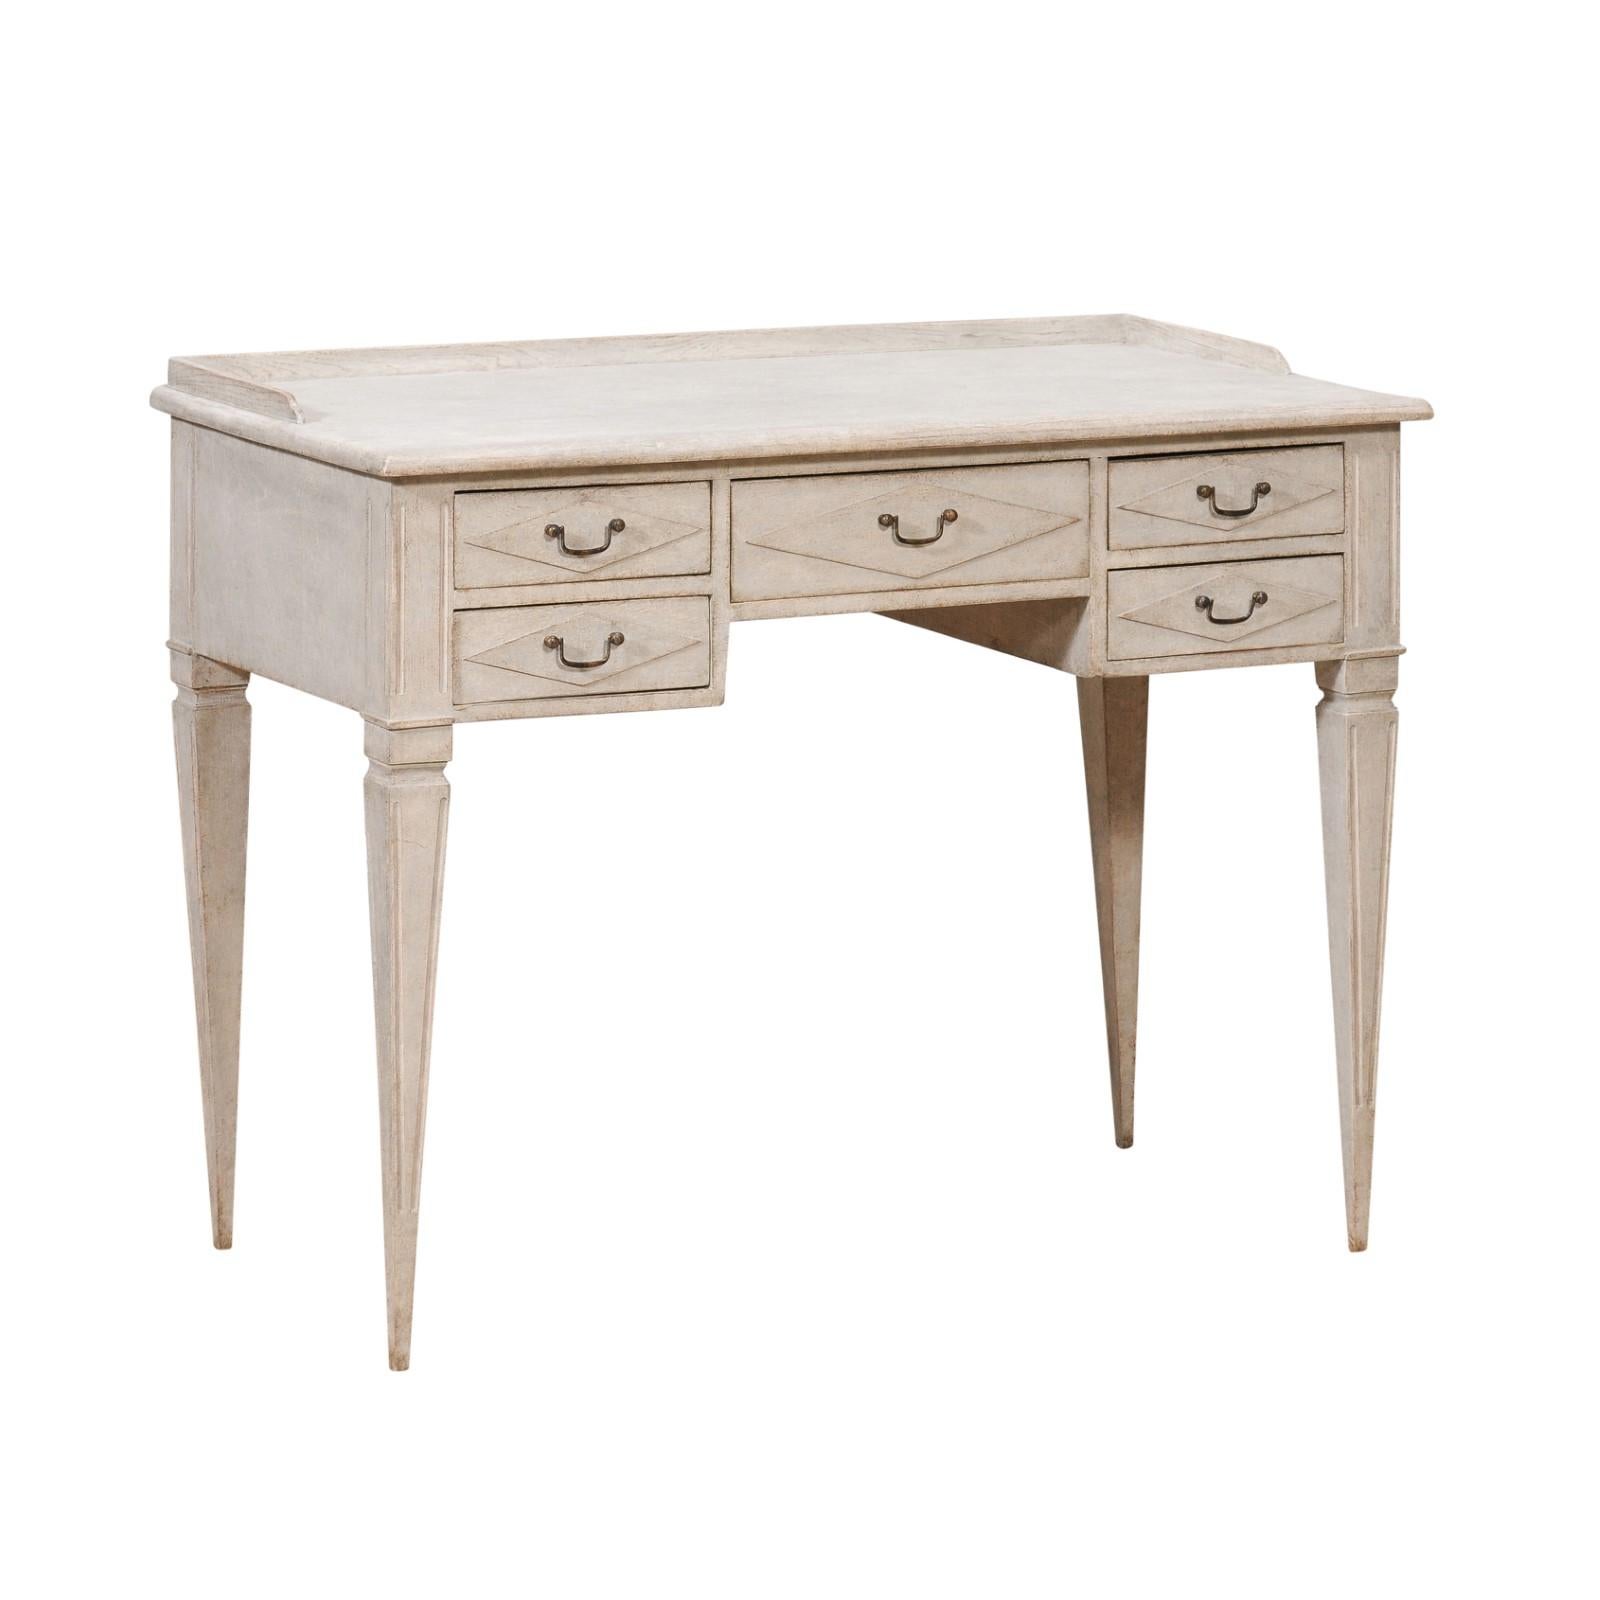 1880s Swedish Gustavian Style Painted Desk with Five Drawers and Tapered Legs For Sale 7